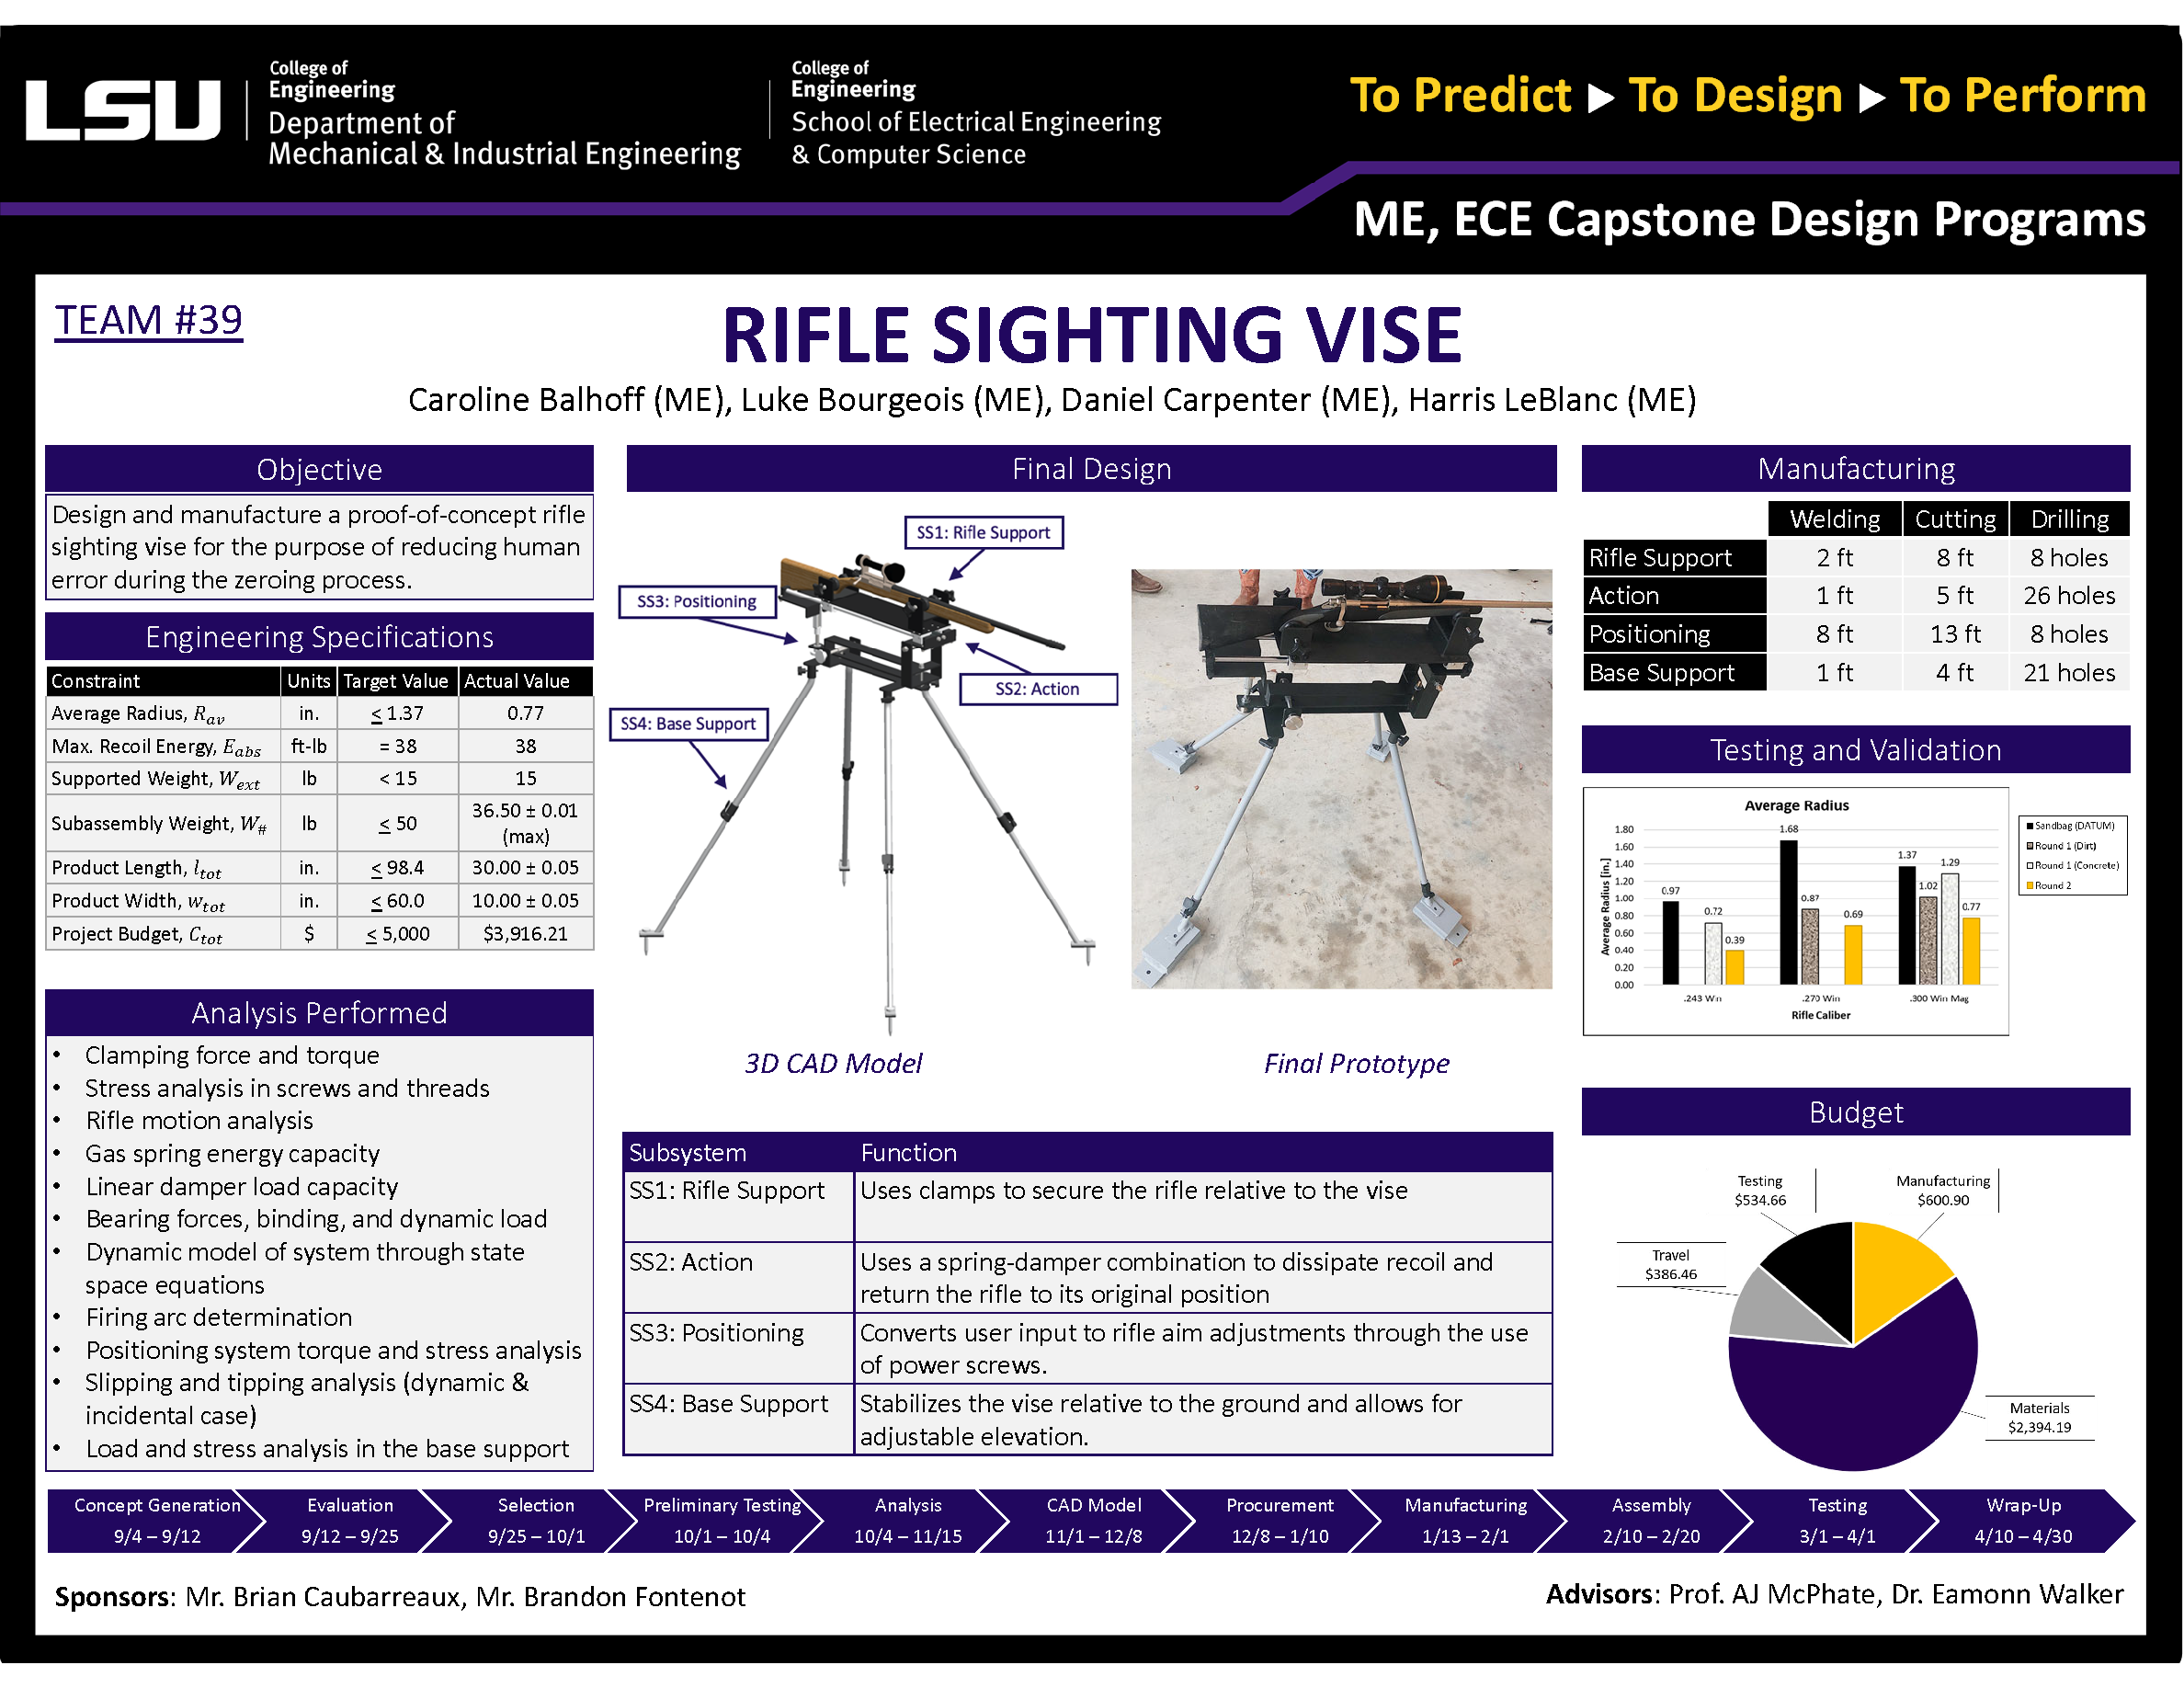 Project 39: Rifle Sighting Vice (2021)